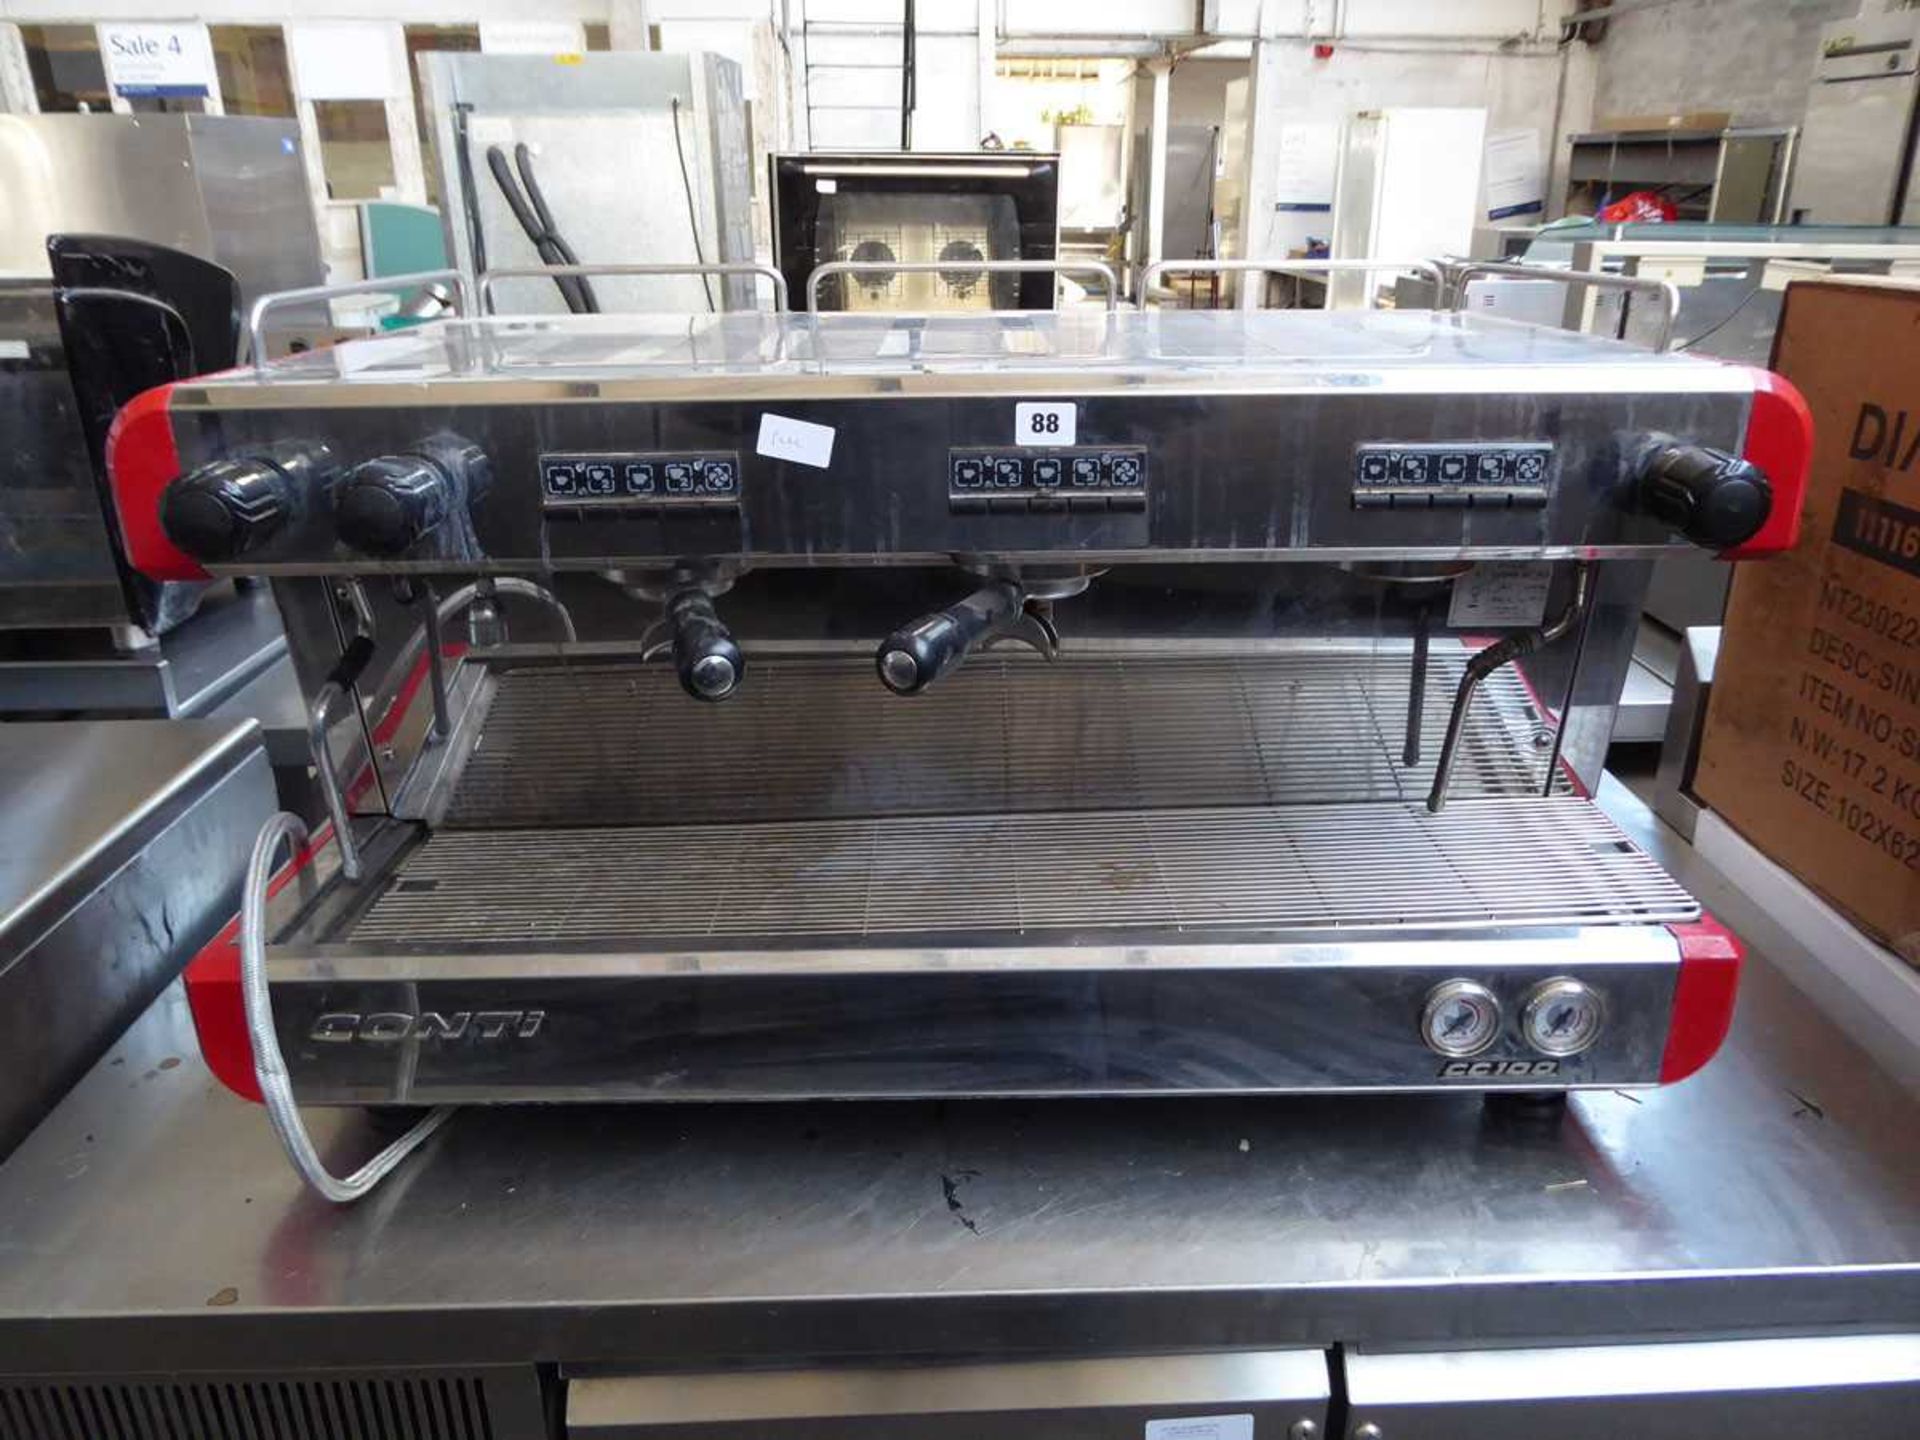 92cm Conti model CC100 3 group coffee machine with 2 group heads